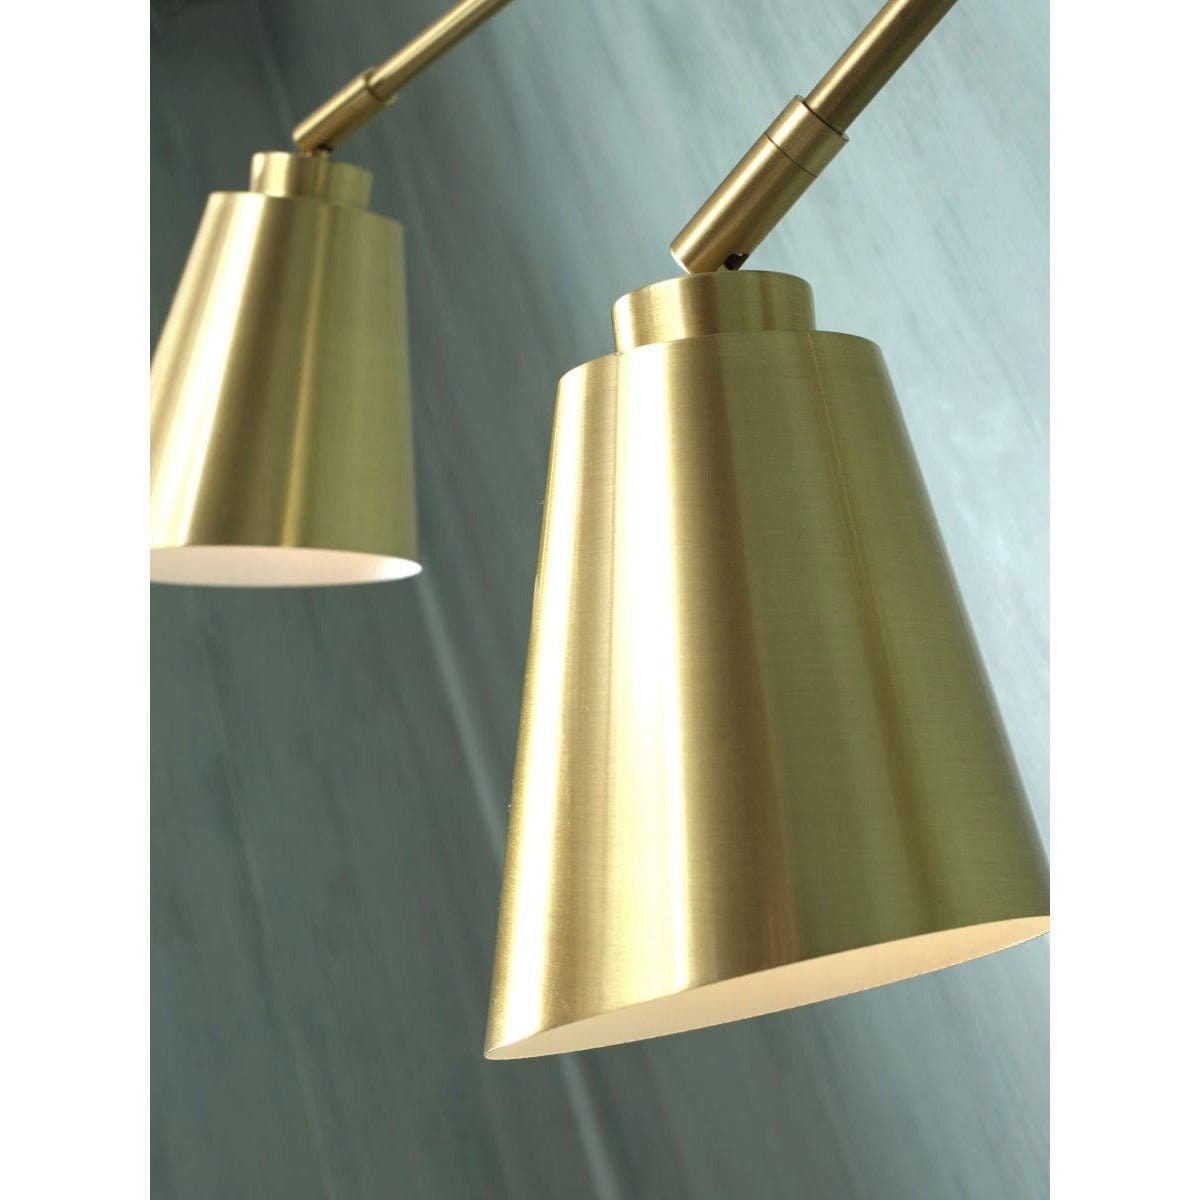 It's About RoMi Wall Lights Bremen Wall Light 2 Adjustable Arms, black or gold